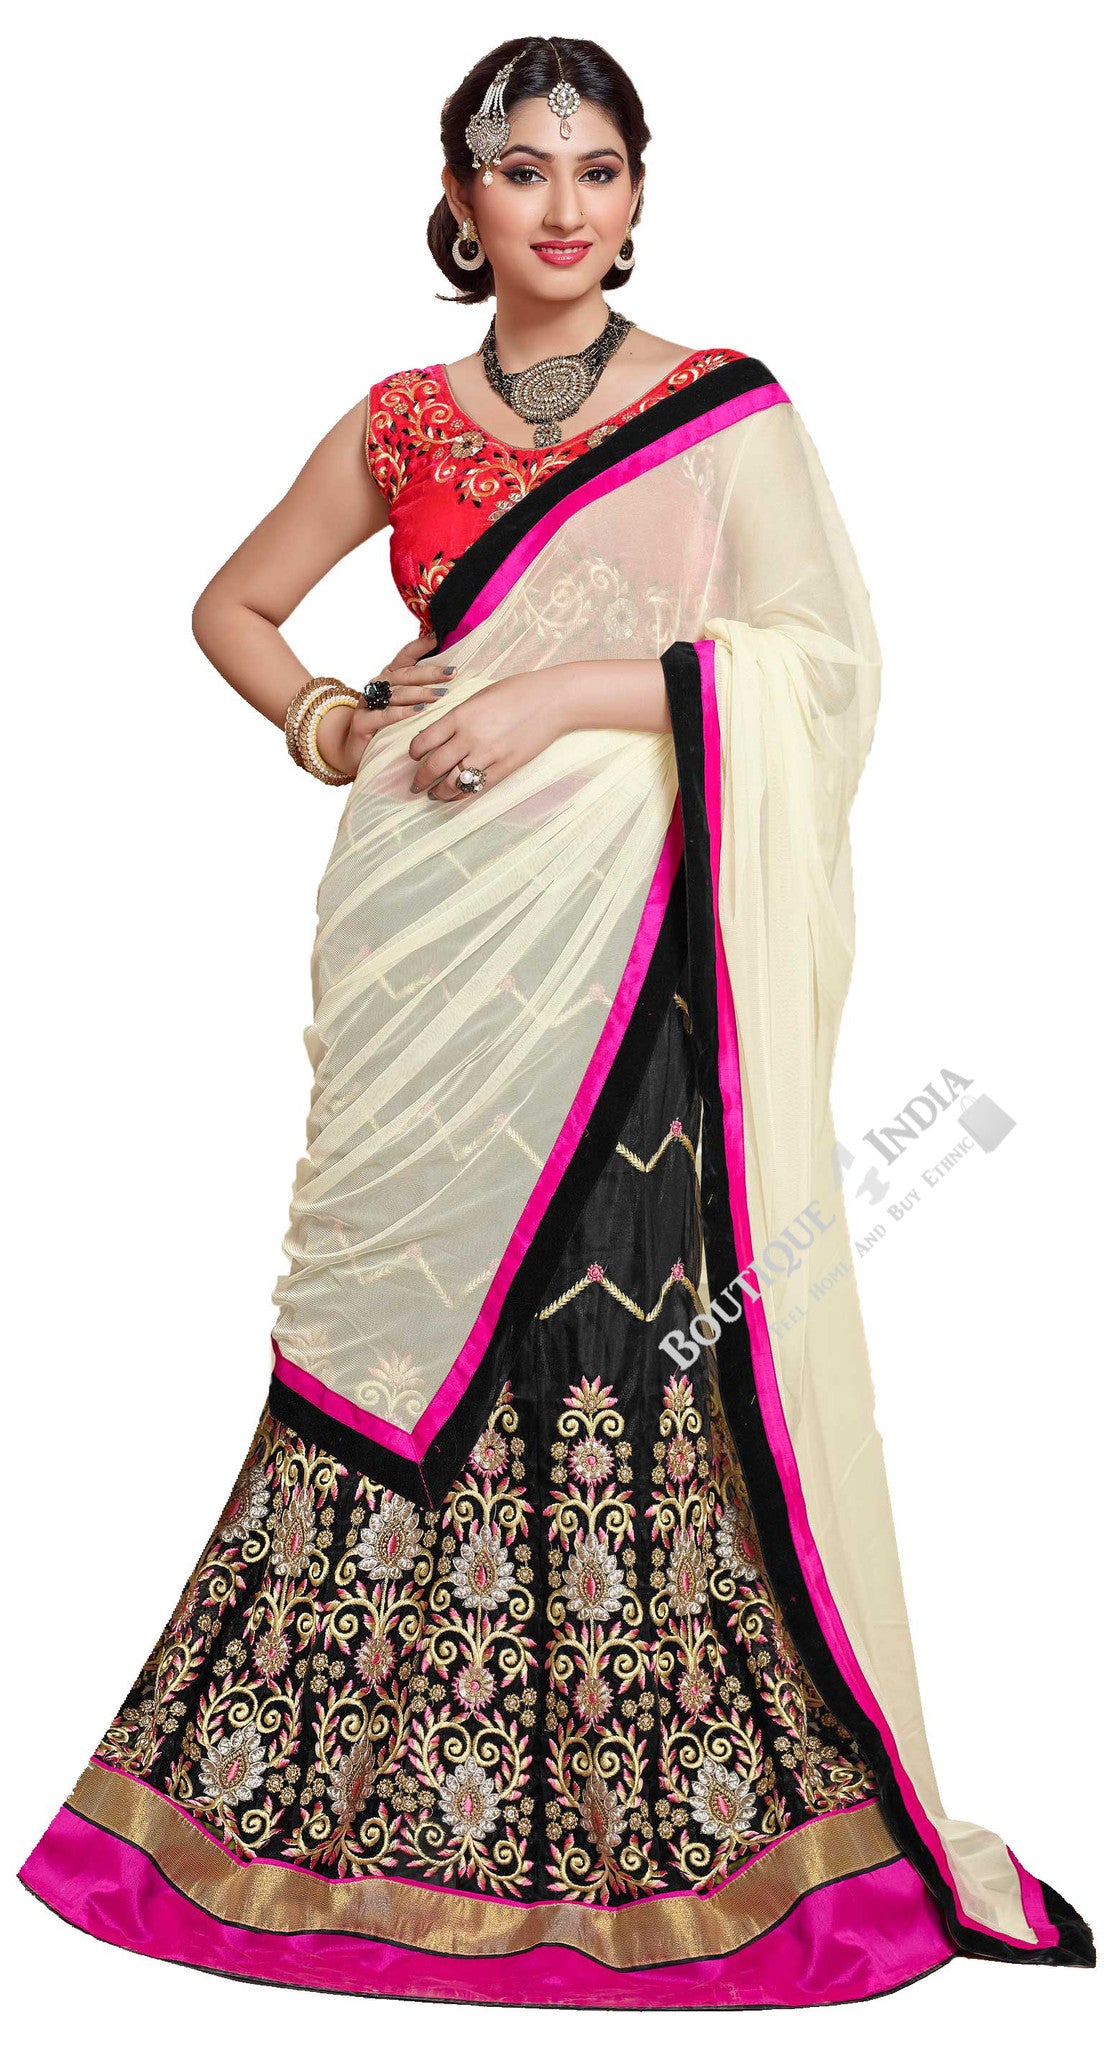 Lehenga - Attractive Heavy Work Designer Lehenga Collection - Pink, Black, Red And Golden Most Beautiful 3 Piece Semi Stitched Lehenga Collection For Party / Wedding / Special Occassions - Semi Stitched, Blouse - Ready to Stitch - Boutique4India Inc.